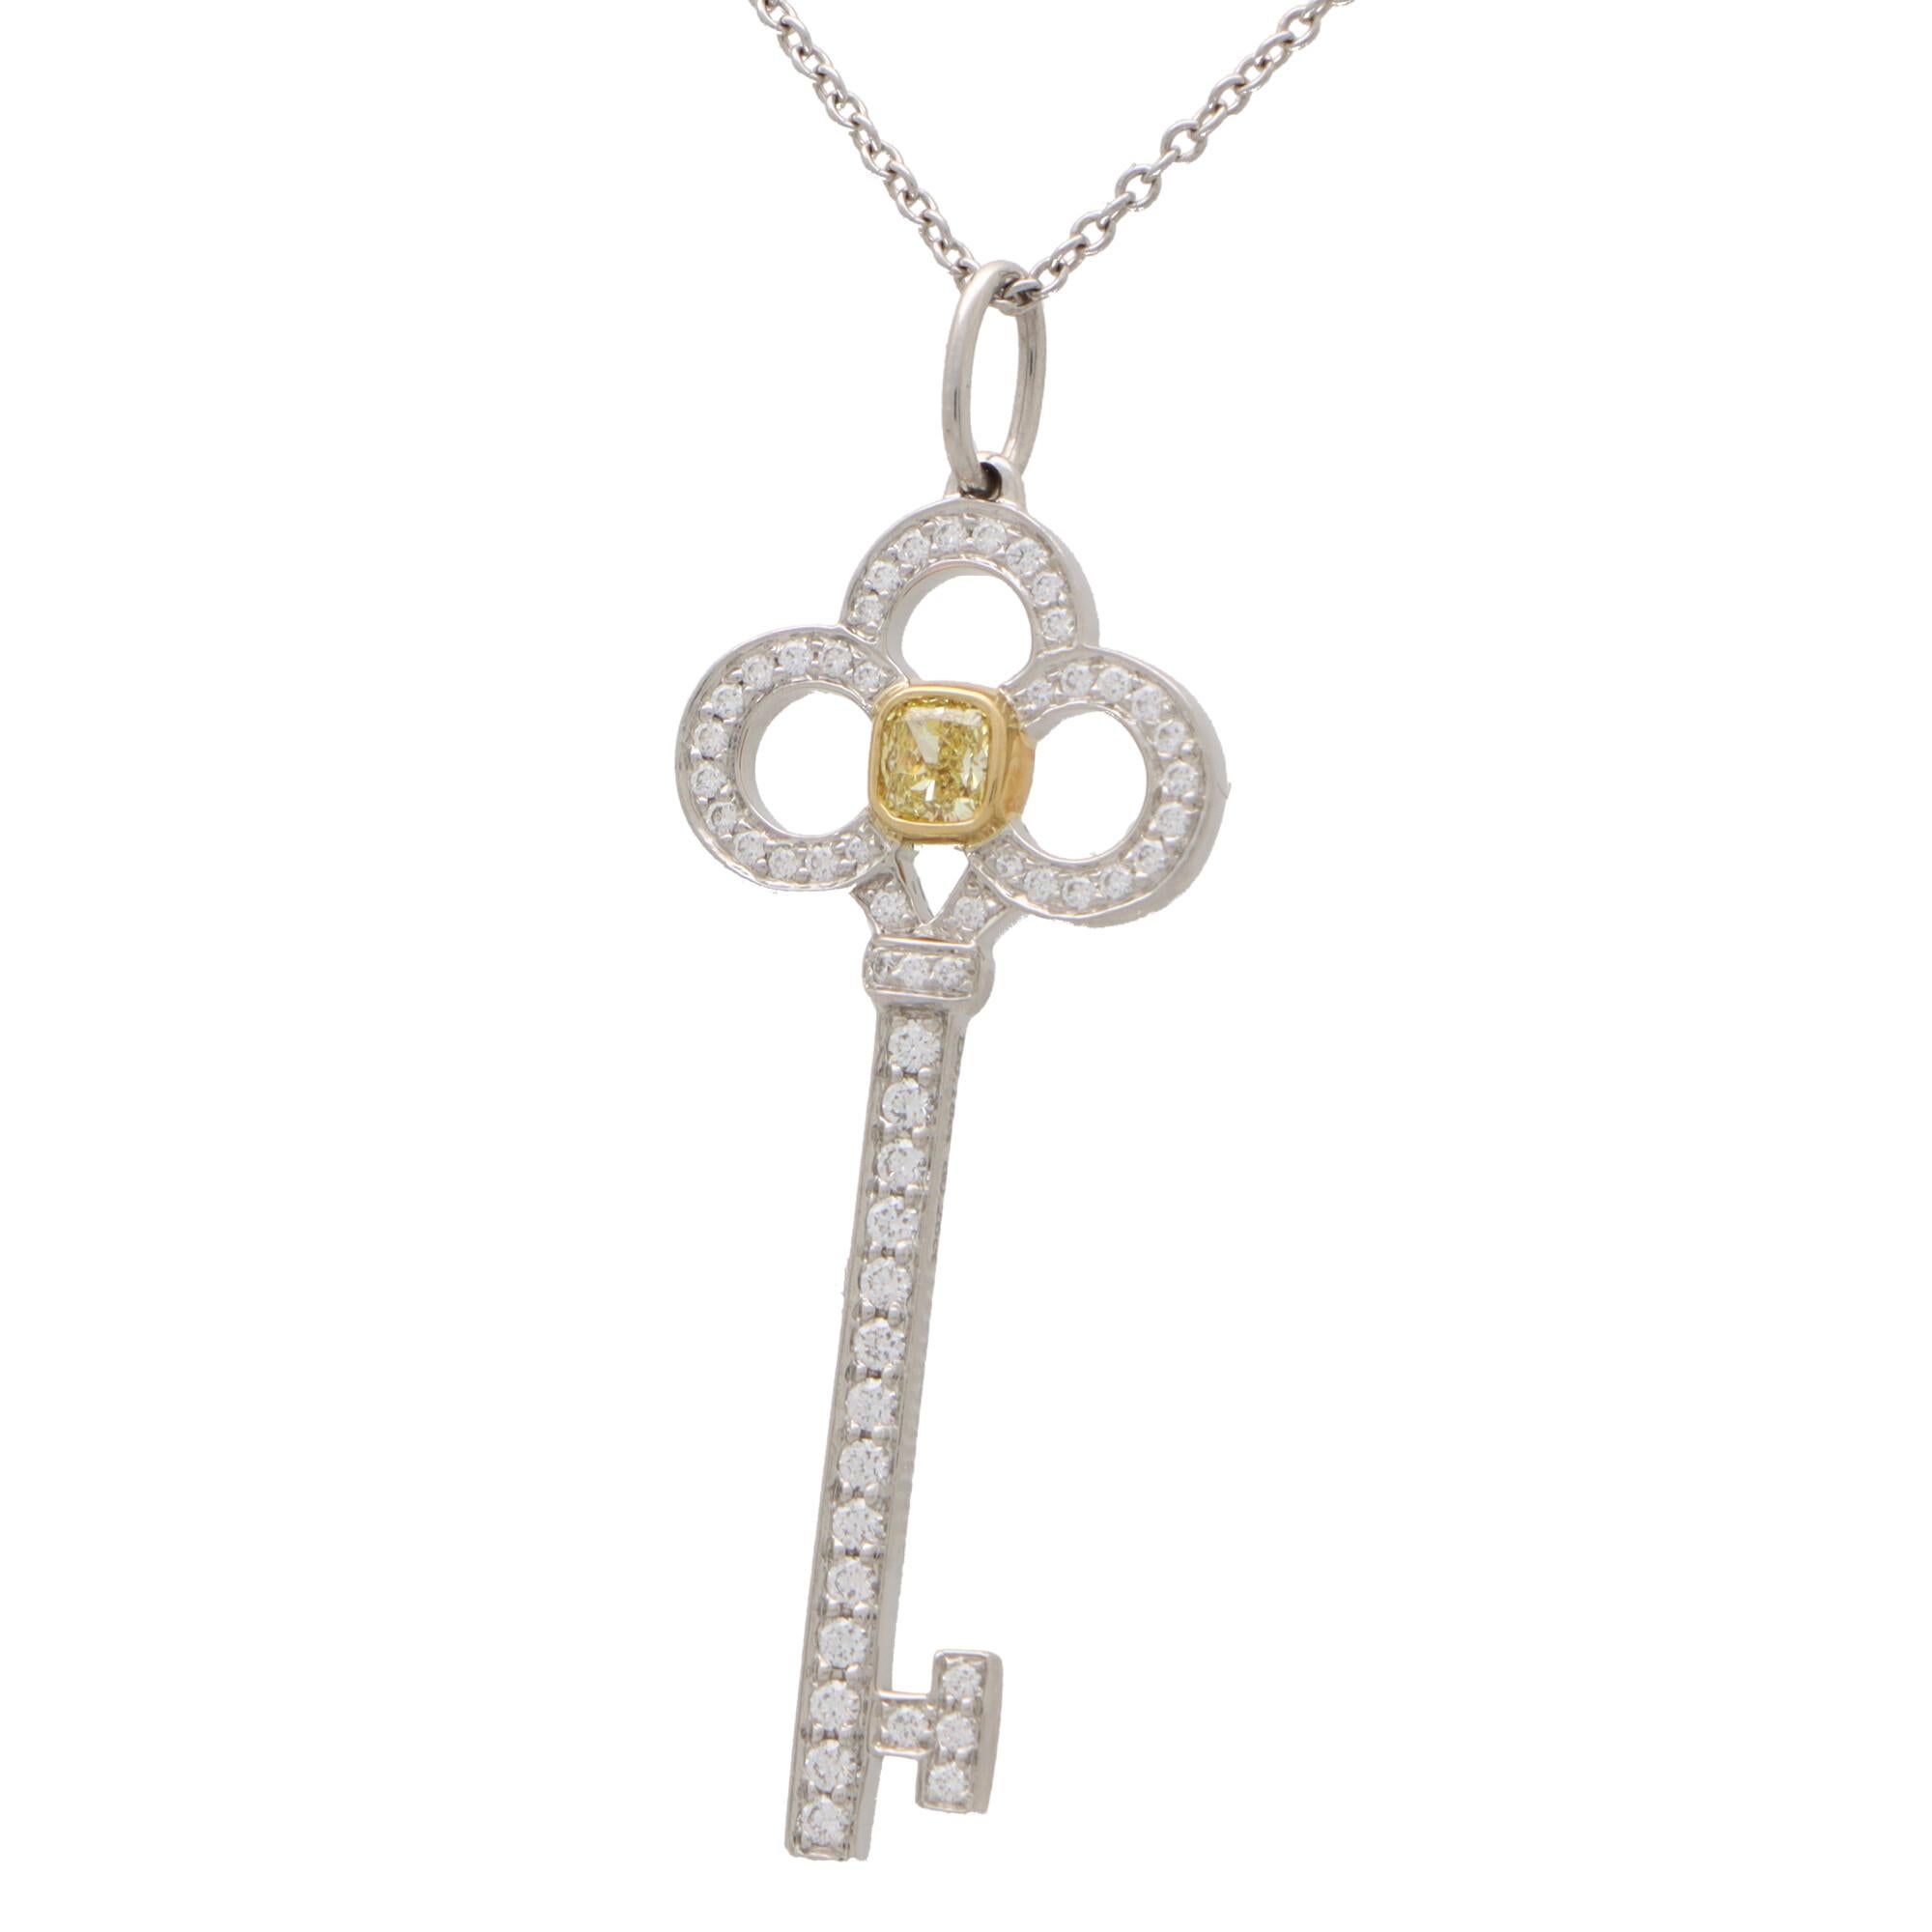 A beautiful vintage Tiffany & Co. yellow and white diamond key pendant set in platinum and 18k yellow gold. 

The pendant depicts an elegant key motif; rub over set centrally with a beautiful 0.18ct cushion cut yellow diamond. Within the stylized